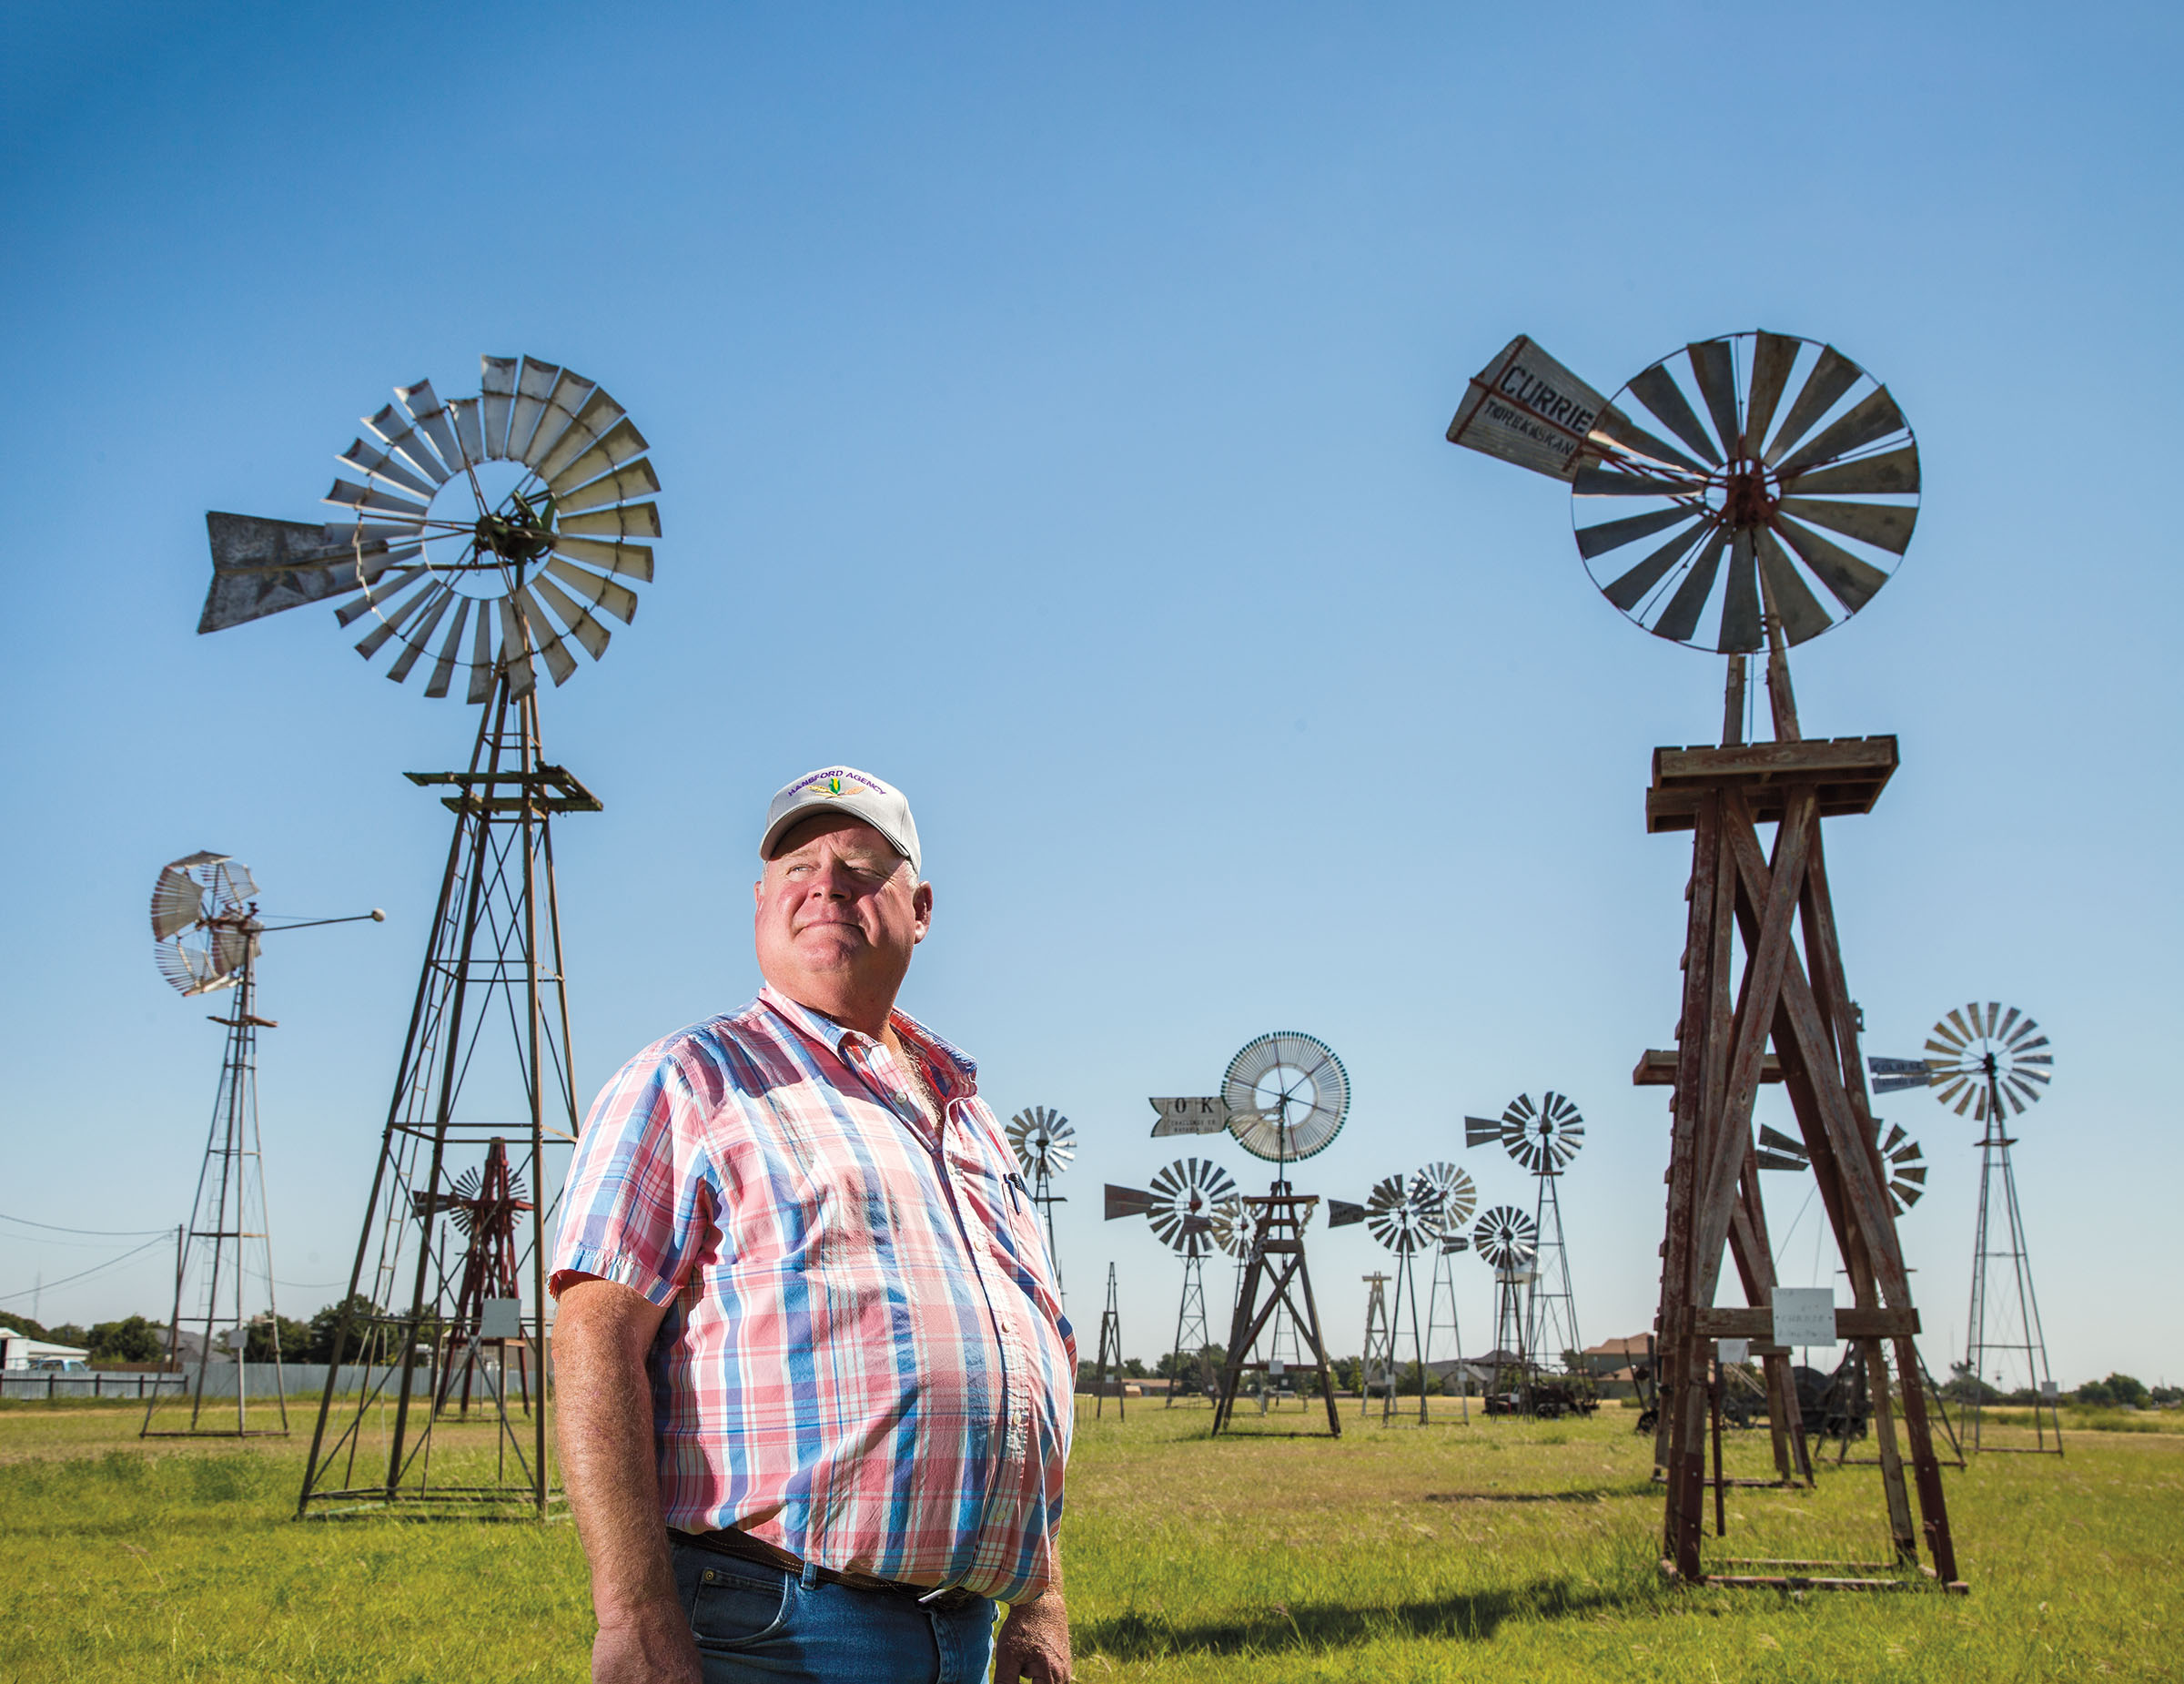 A man in a striped shirt and baseball cap stands in a field with numerous wooden old-fashioned windmills